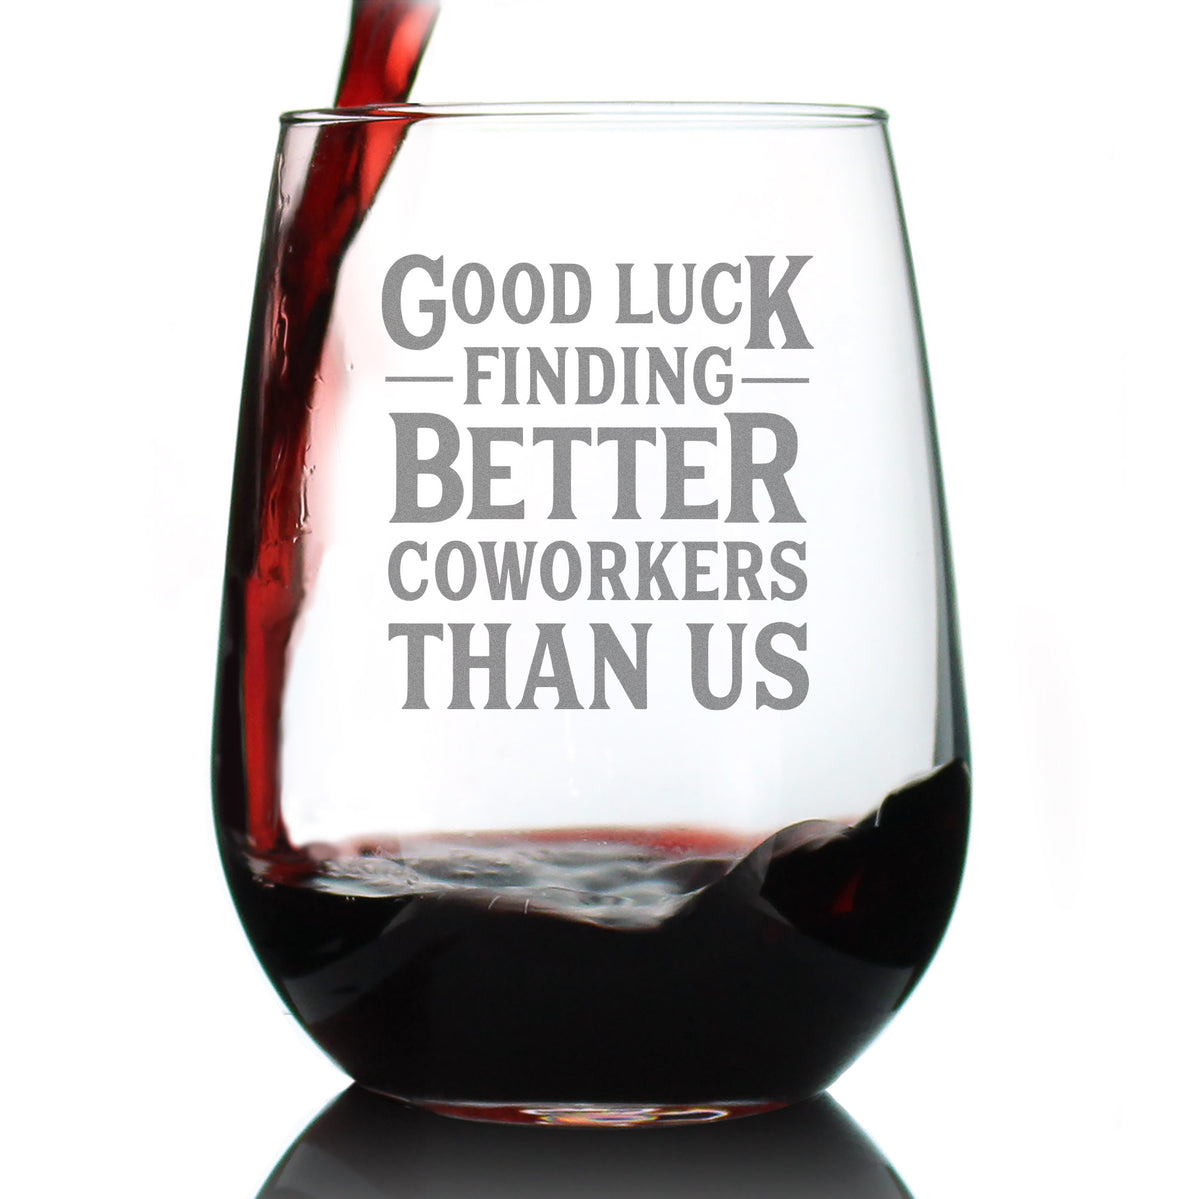 Good Luck Finding Better Coworkers Than Us - Funny Stemless Wine Glass Gift for Coworker - Fun Unique Office Gifts